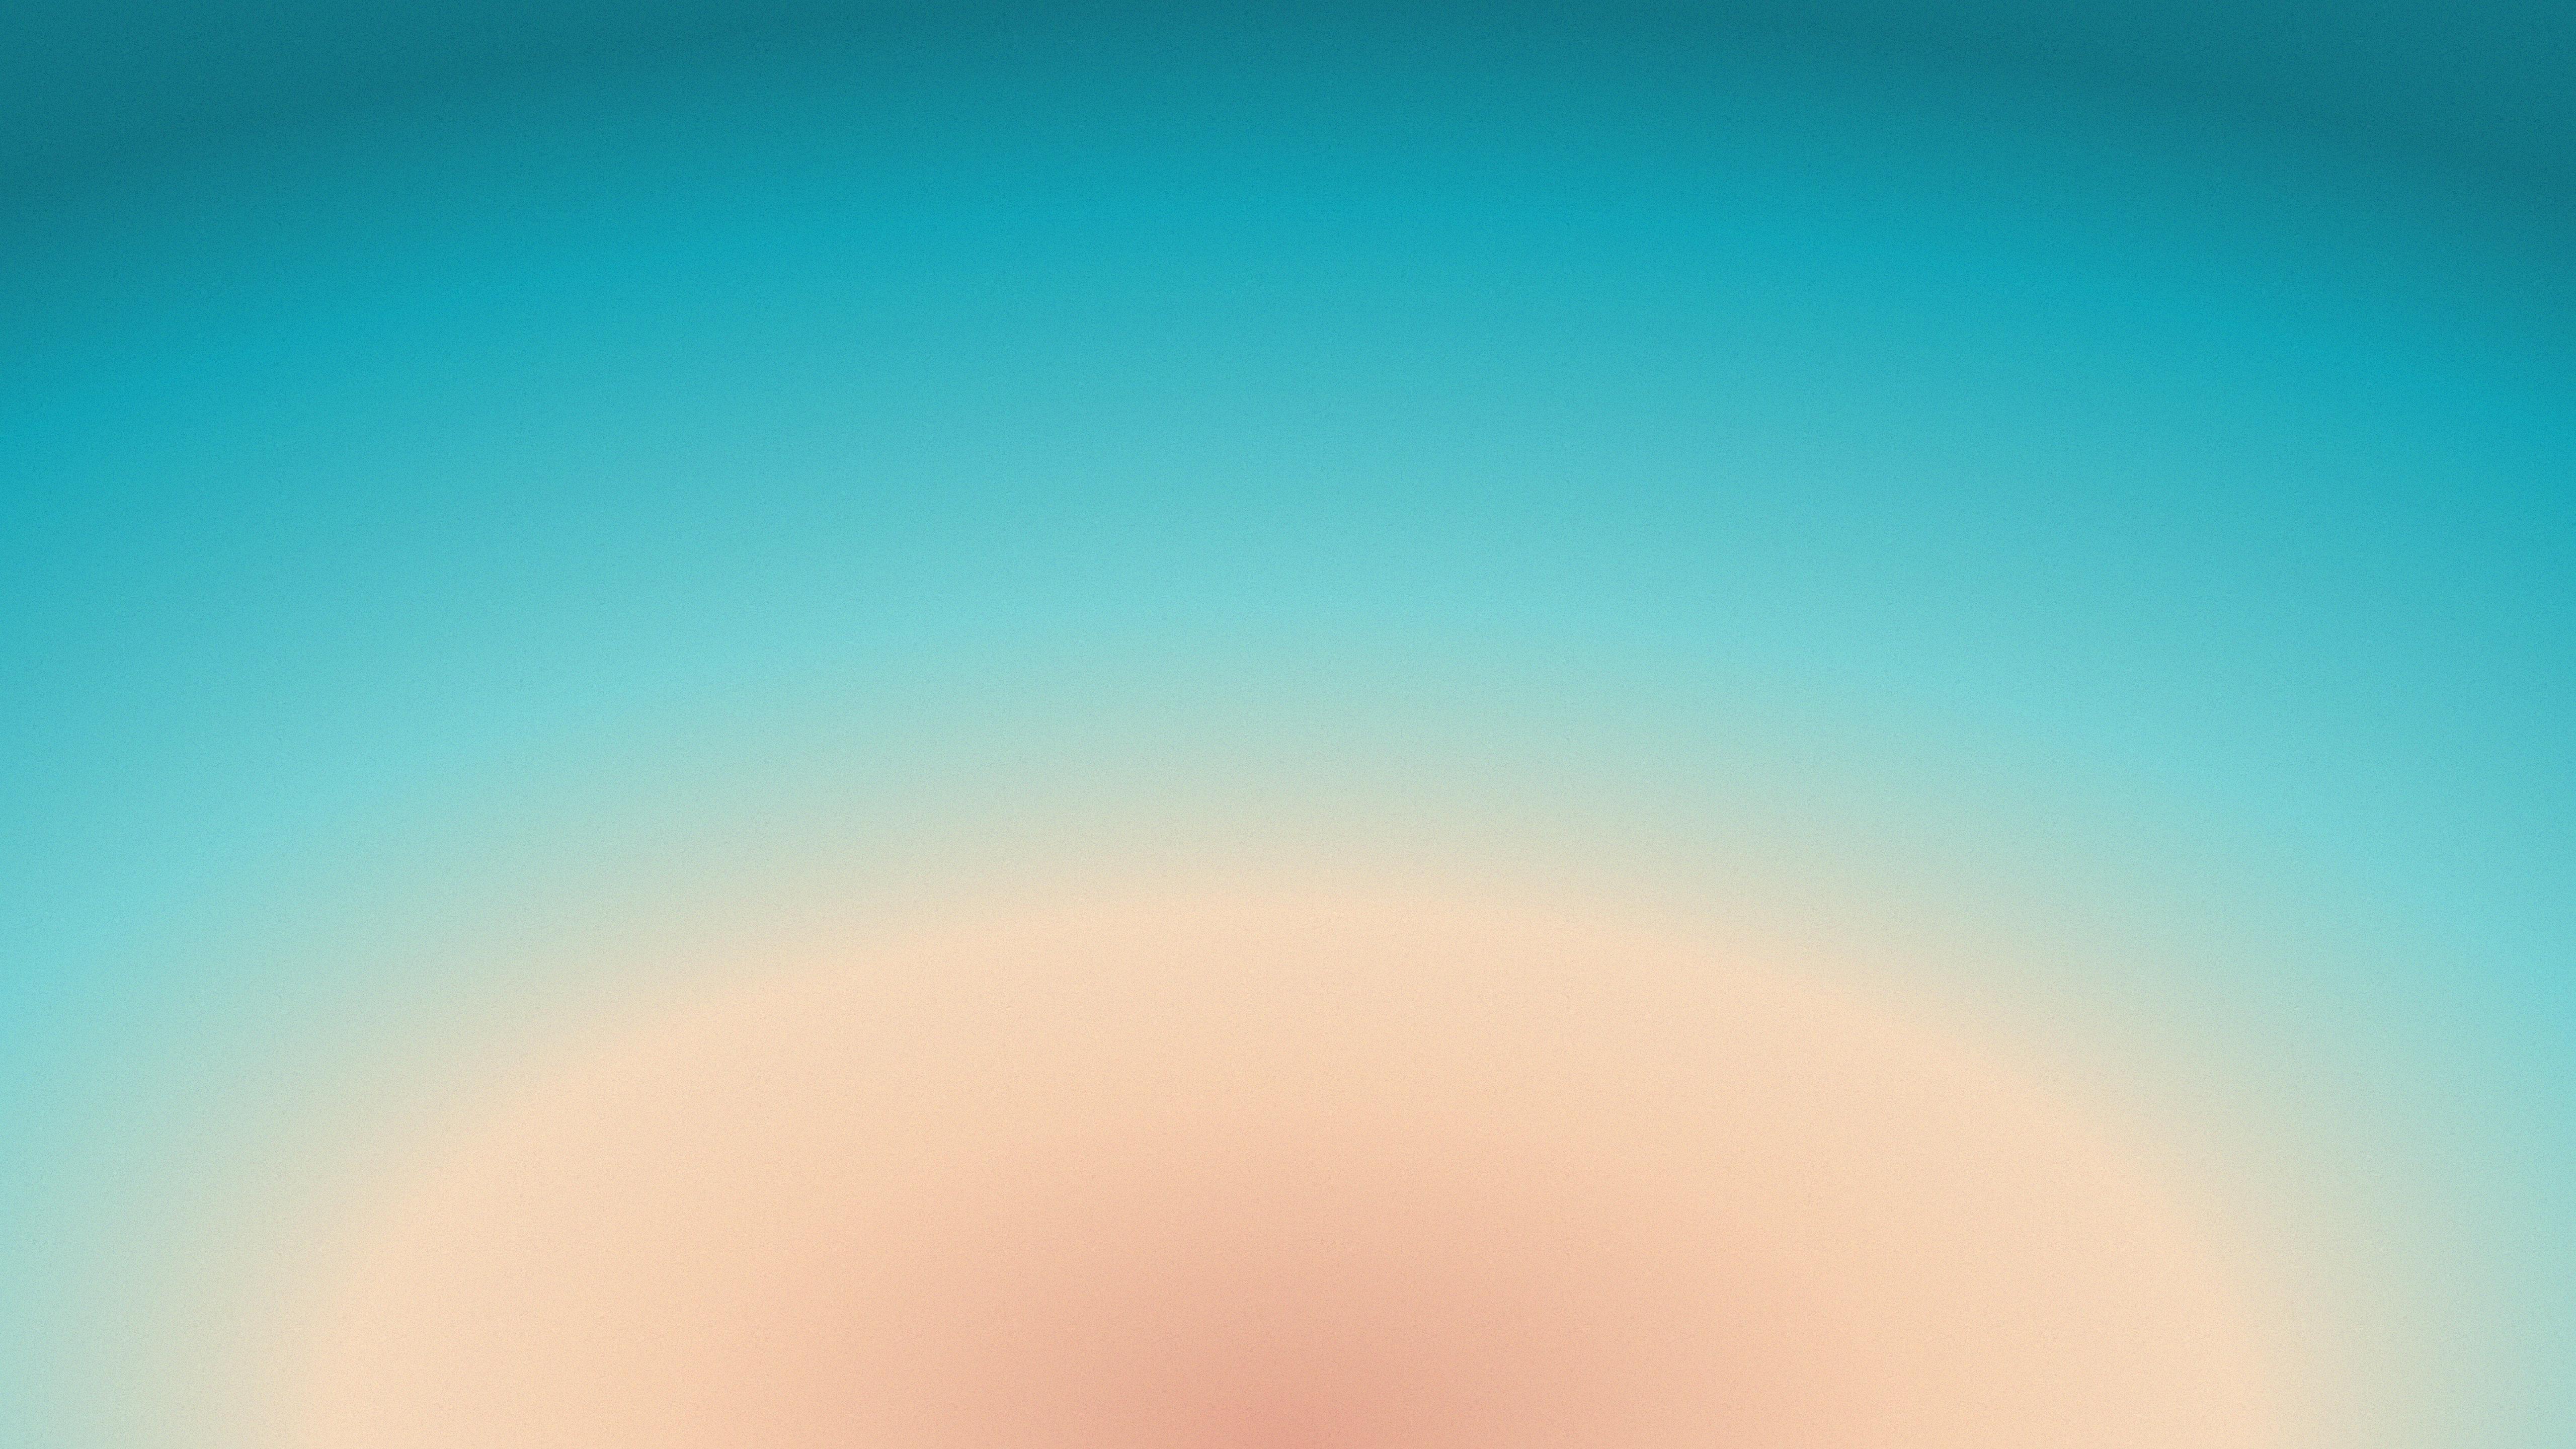 One of the iOS 7 Gradient Wallpaper in 5K and some Noise Overlay